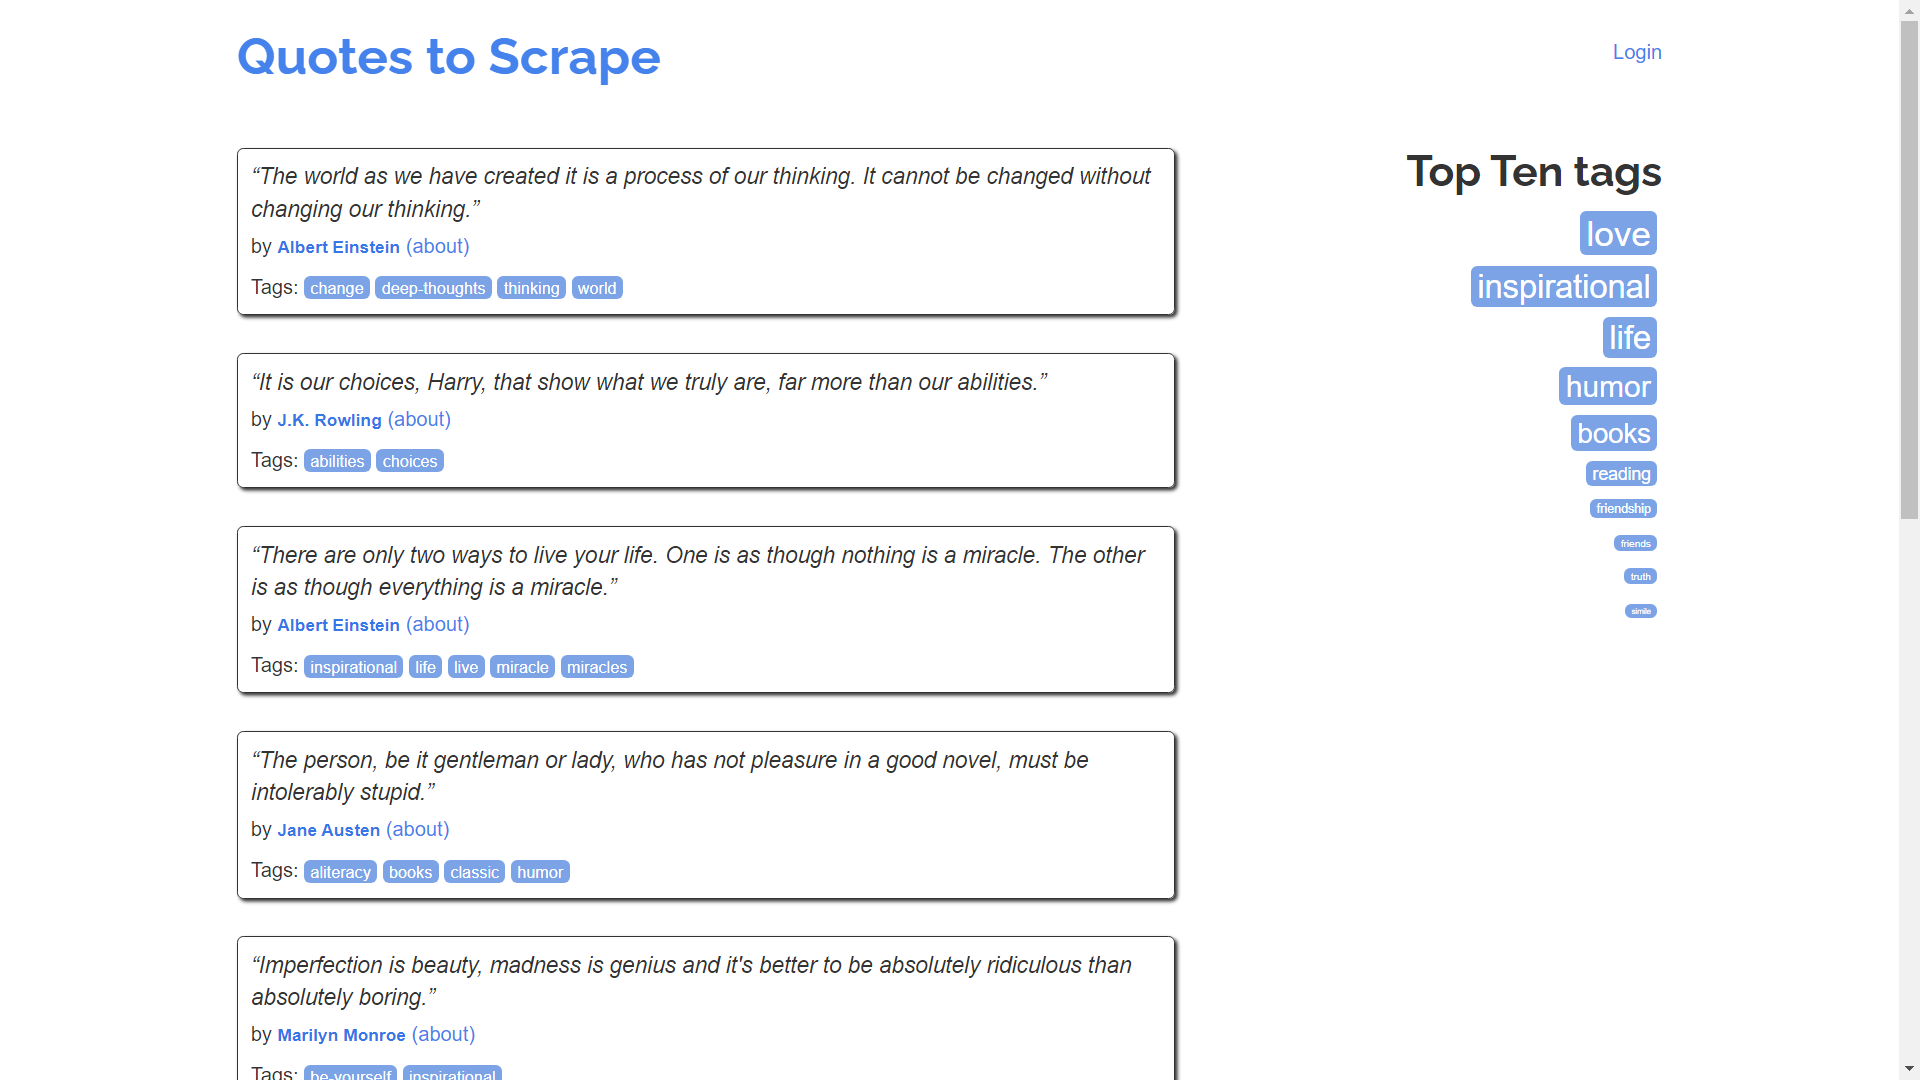 Quotes to Scrape homepage